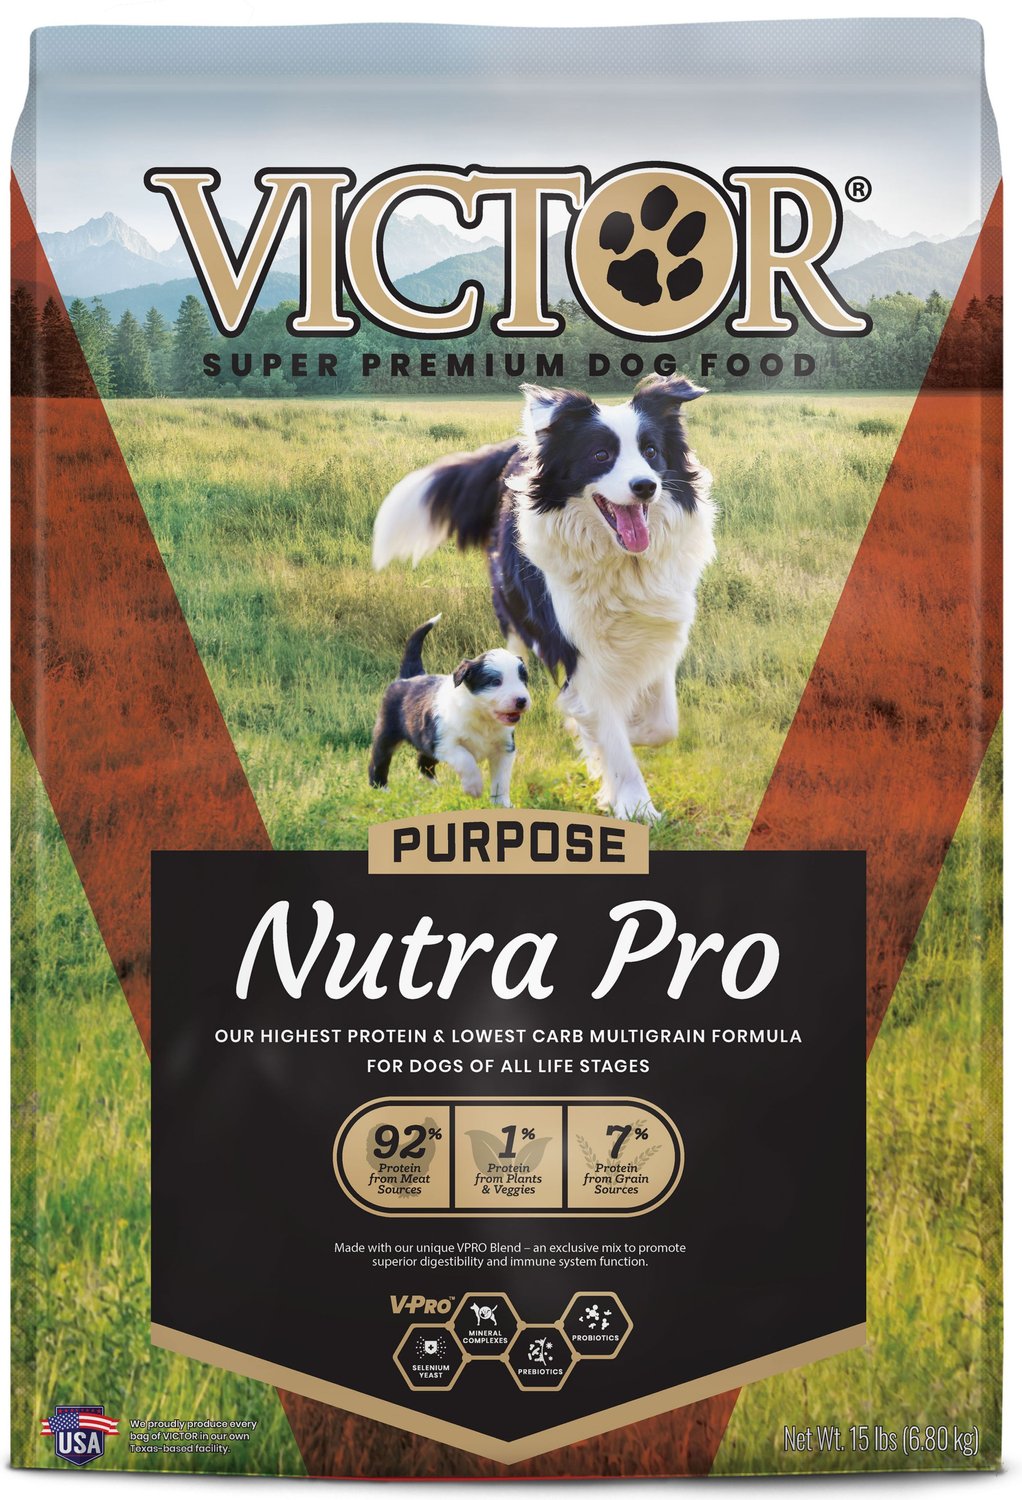 victor large breed puppy food